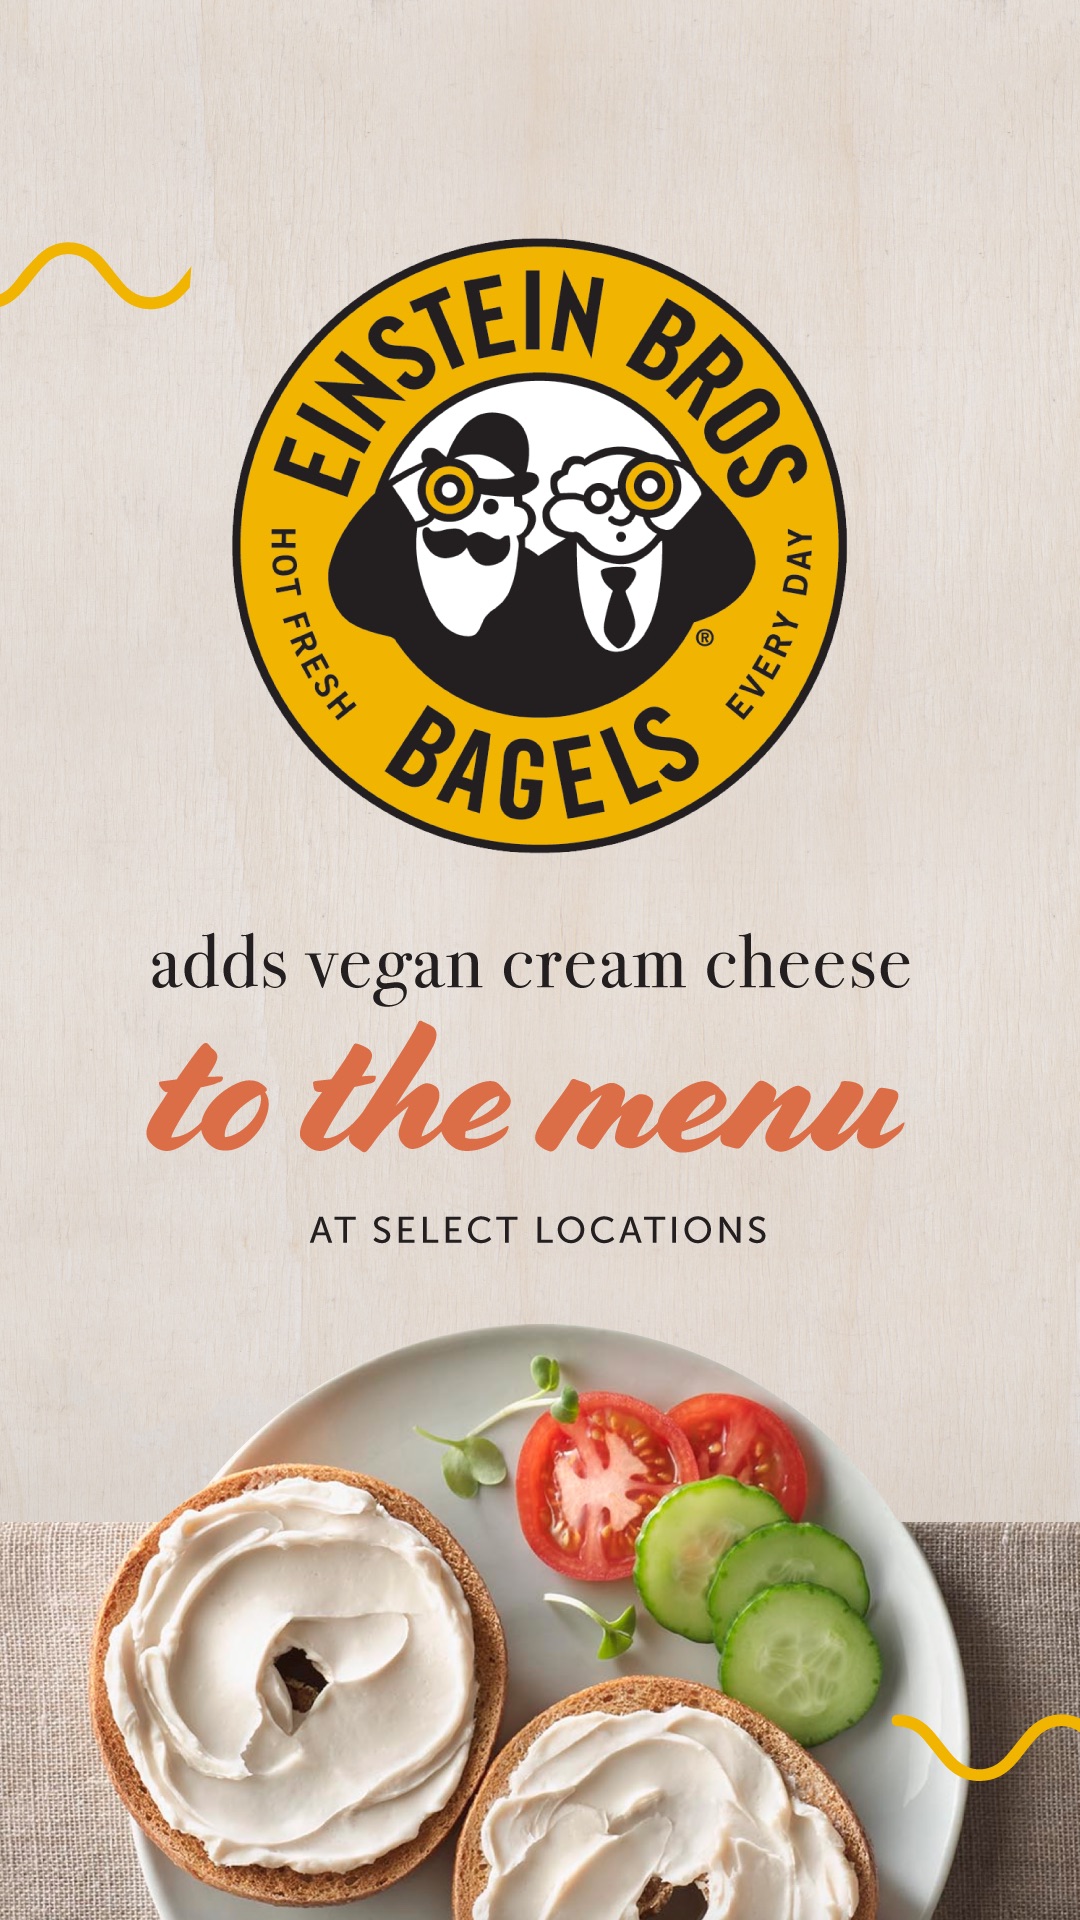 Einstein Bros. Bagels Adds Vegan Cream Cheese to the Menu at Select Locations